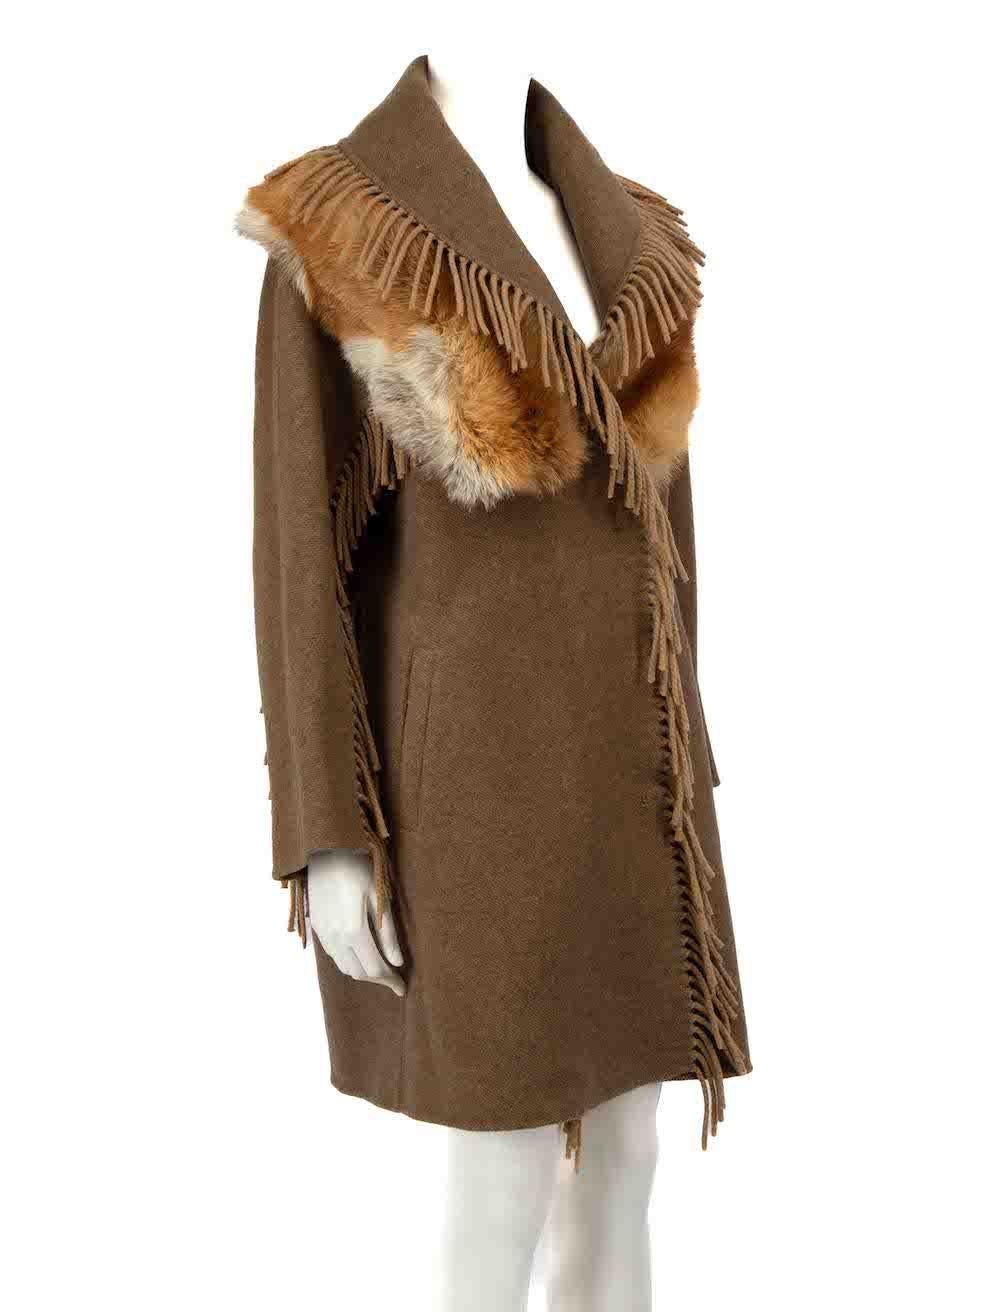 CONDITION is Very good. Minimal wear to coat is evident. Minimal wear with the matching belt missing on this used Ermanno Scervino designer resale item.
 
Details
Brown
Wool
Mid length coat
Fringed accent
Detachable fur collar
Front snap button up